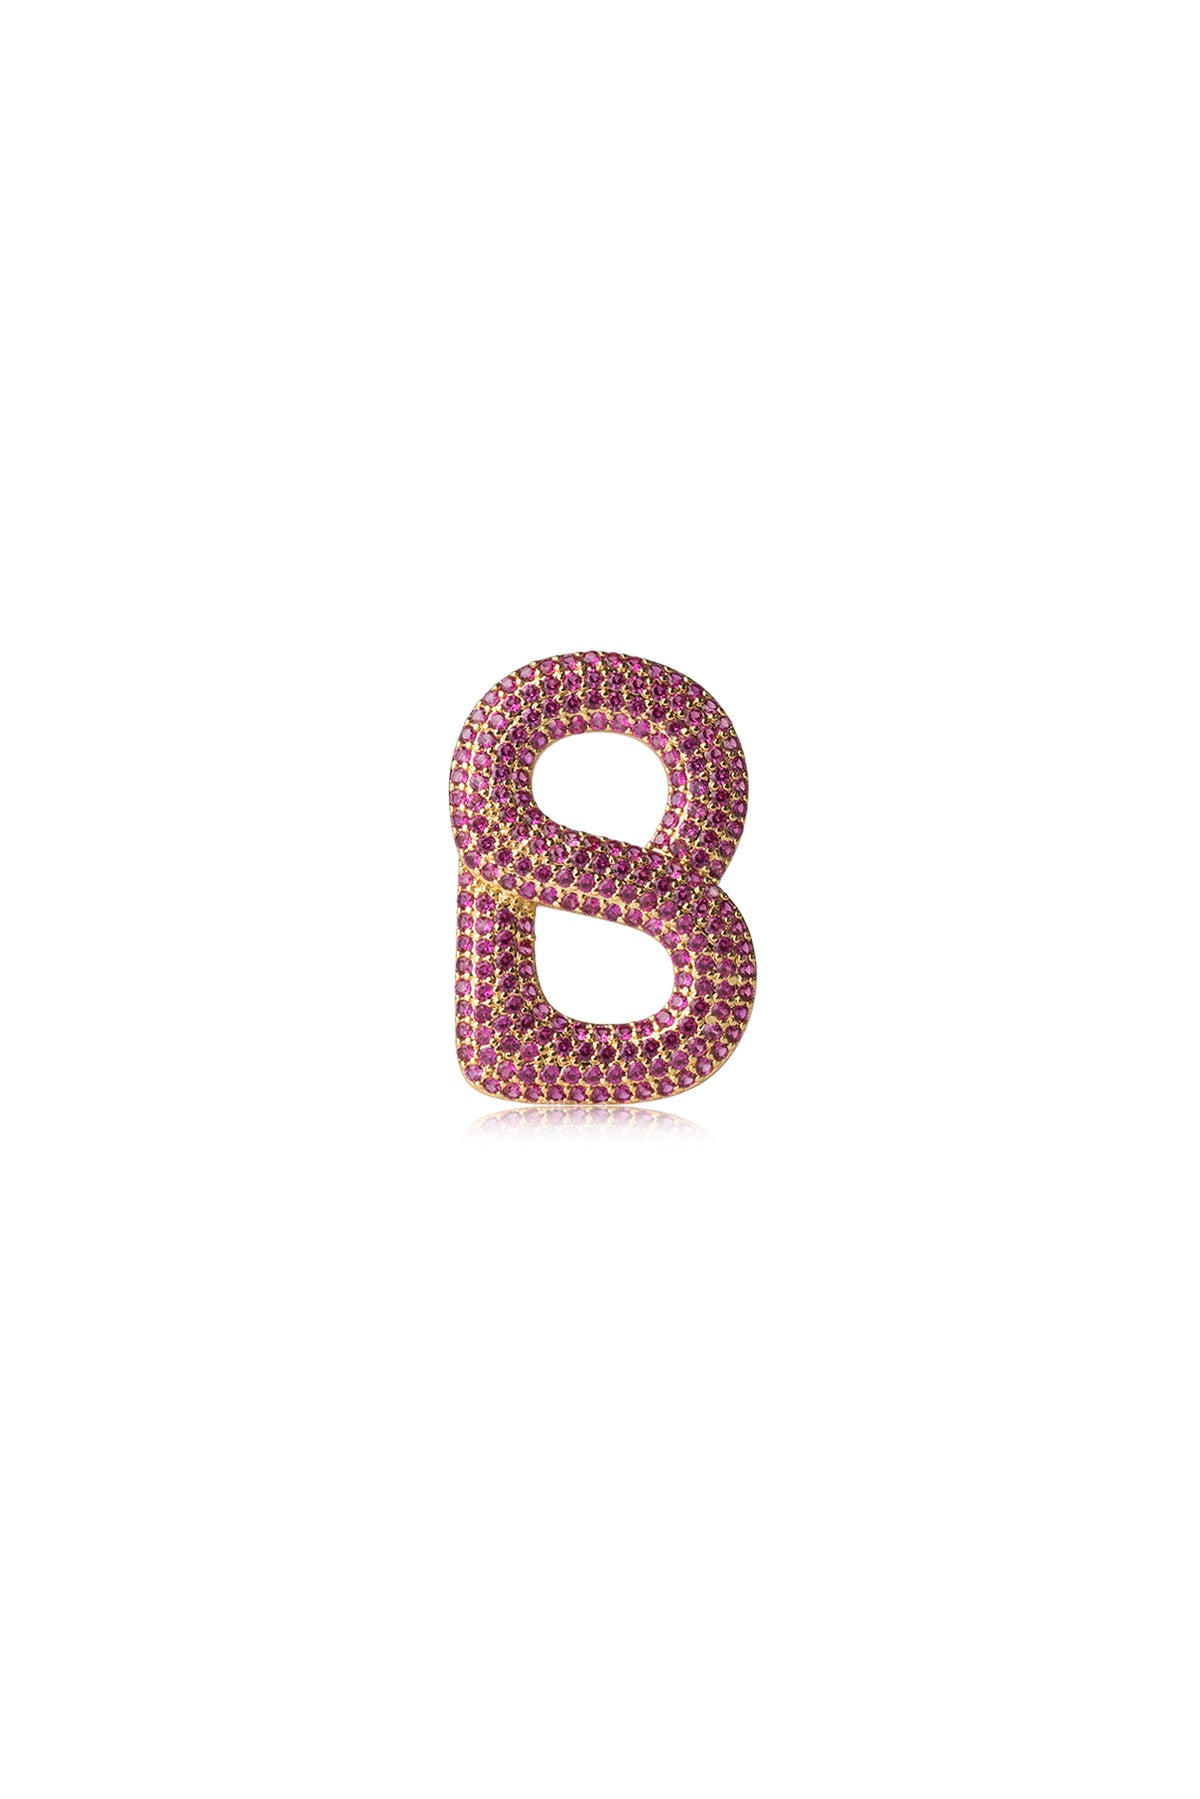 LUXE SIGNATURE BROOCH - RUBY